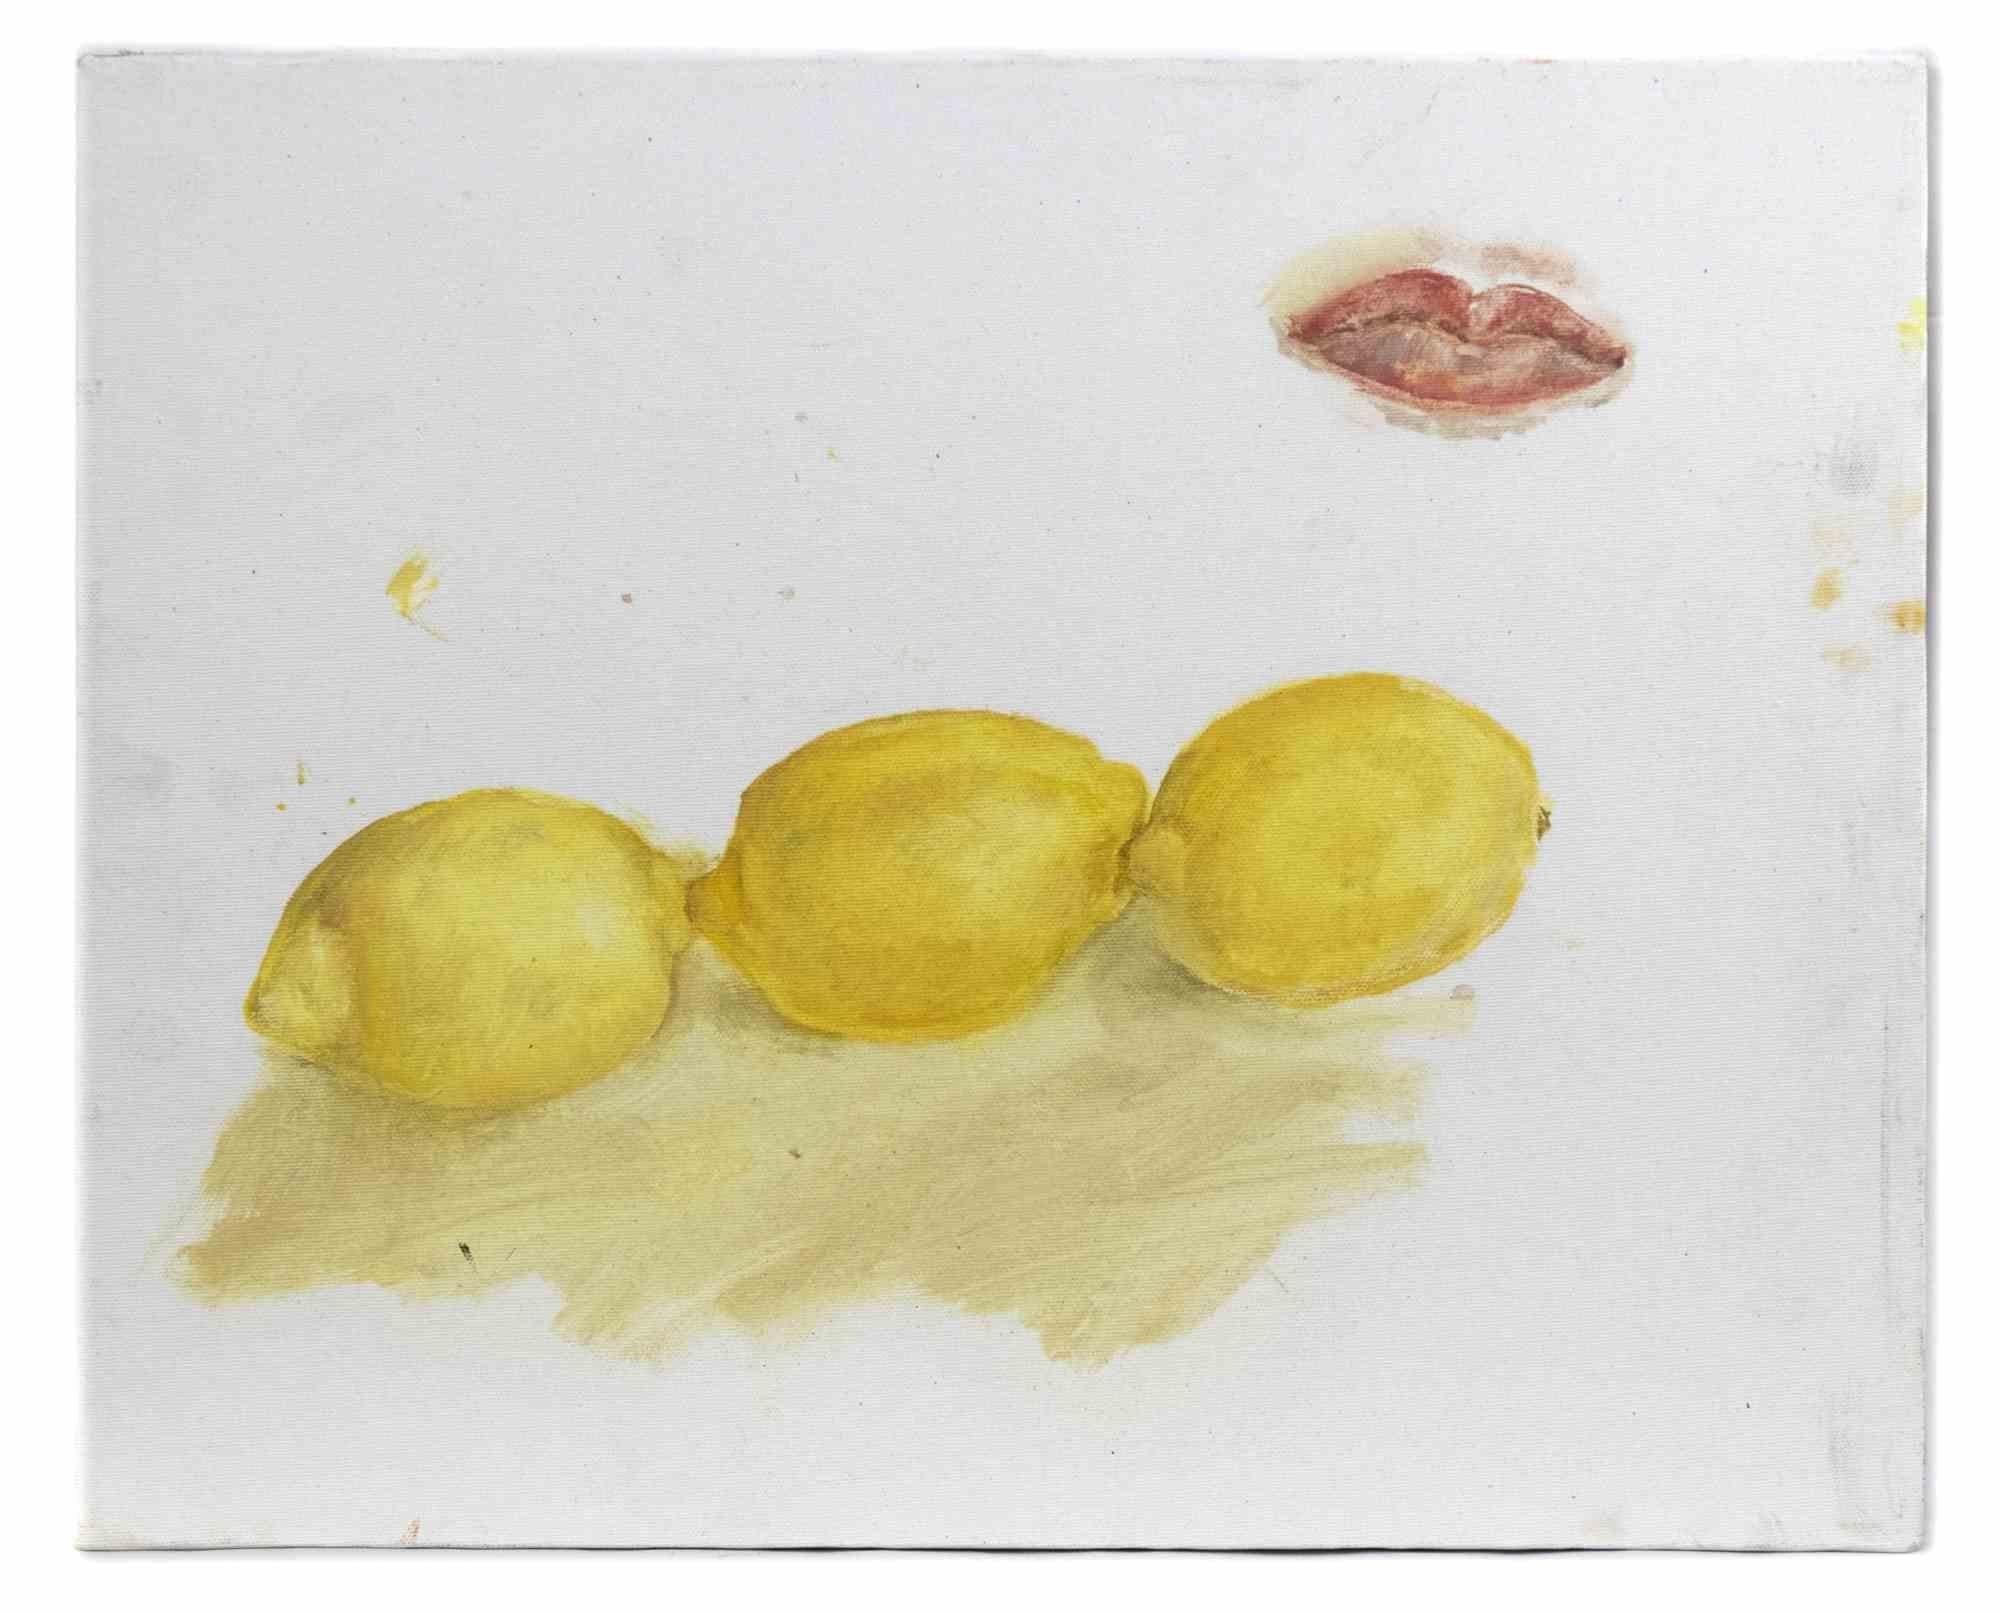 Still life with lemons is an original contemporary artwork, realized in 2010s by the emerging artist Anastasia Kurakina.

Mixed colored oil painting on canvas.

Good conditions